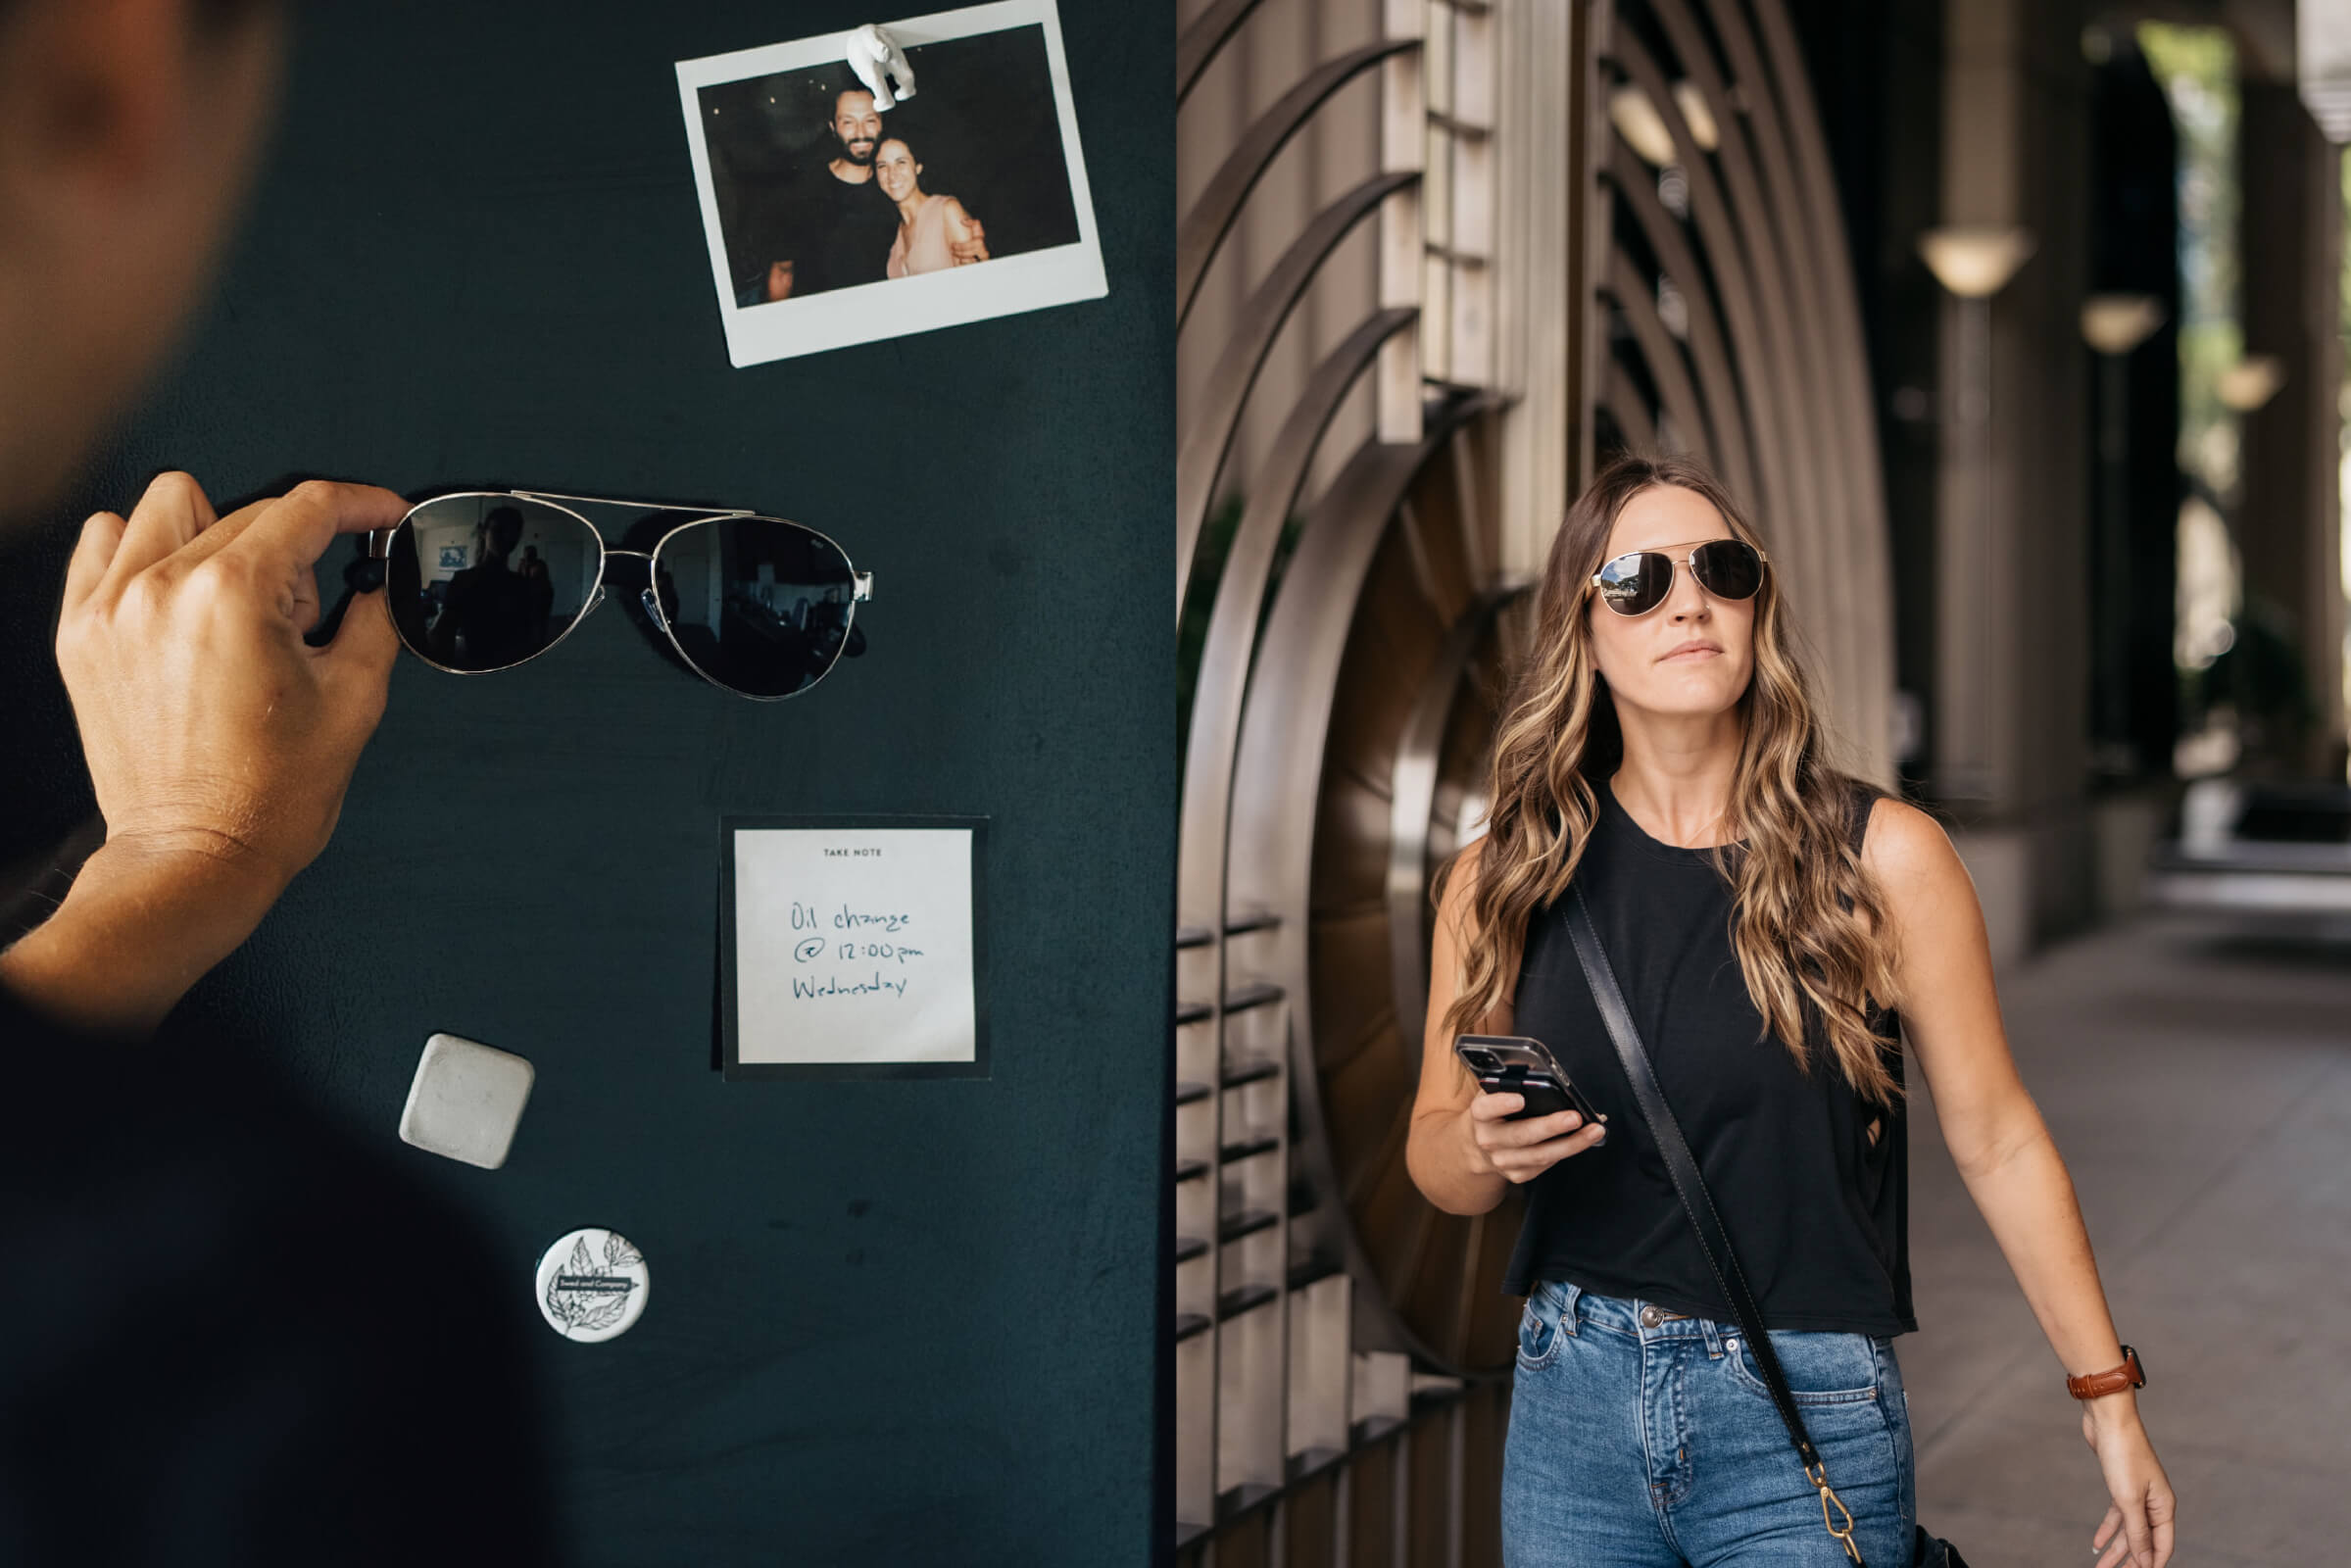 Two photos, one of a pair of magnetic MagLock sunglasses being taken off a fridge, the other of a woman walking into the sunlight wearing the titanium aviator Maverick sunglasses